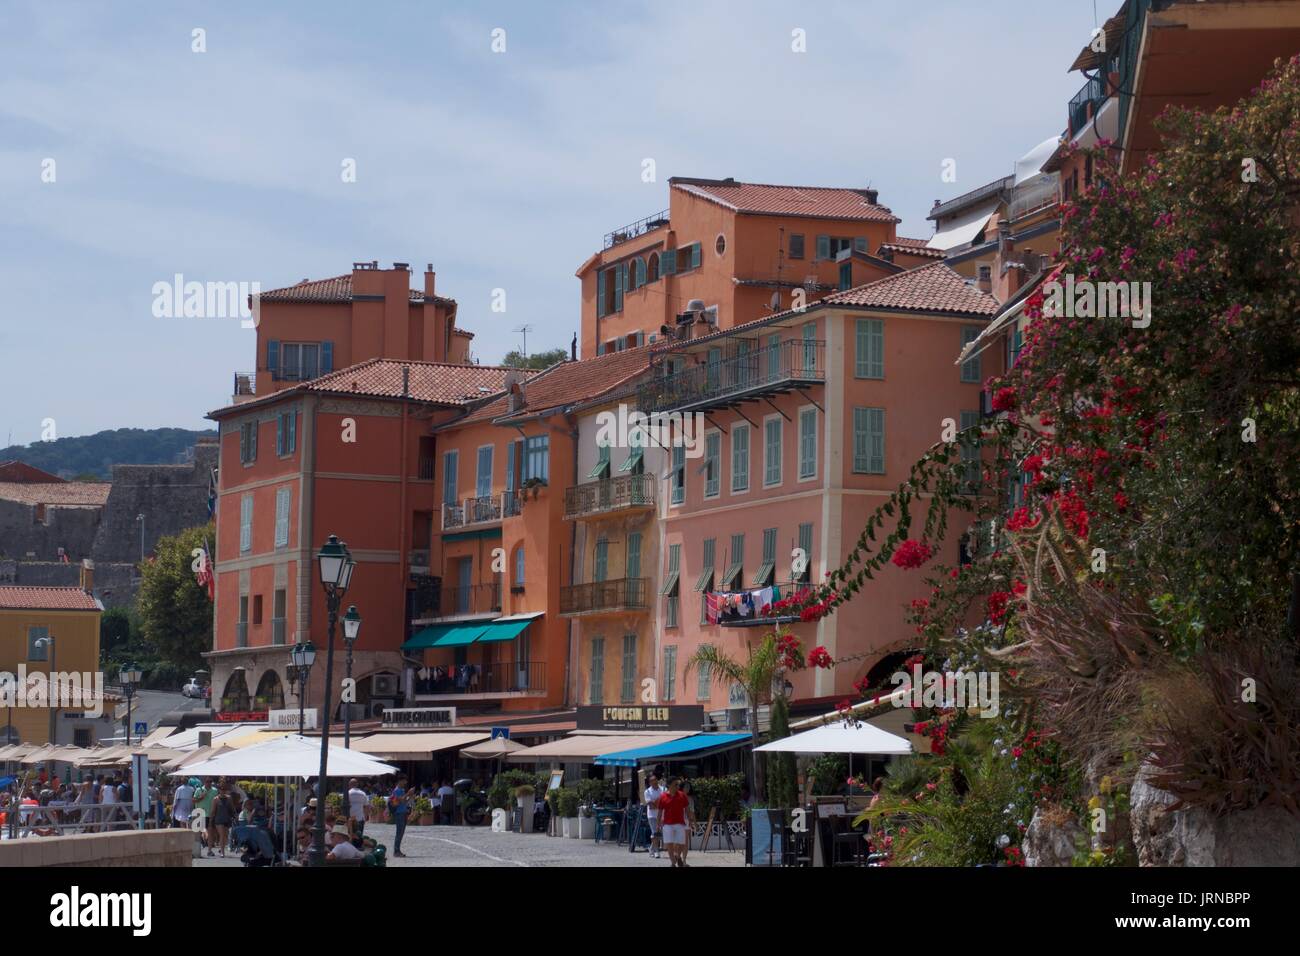 Waterfront street scene with tourists at restaurants and cafes, Beaulieu-sur-Mer, France Stock Photo